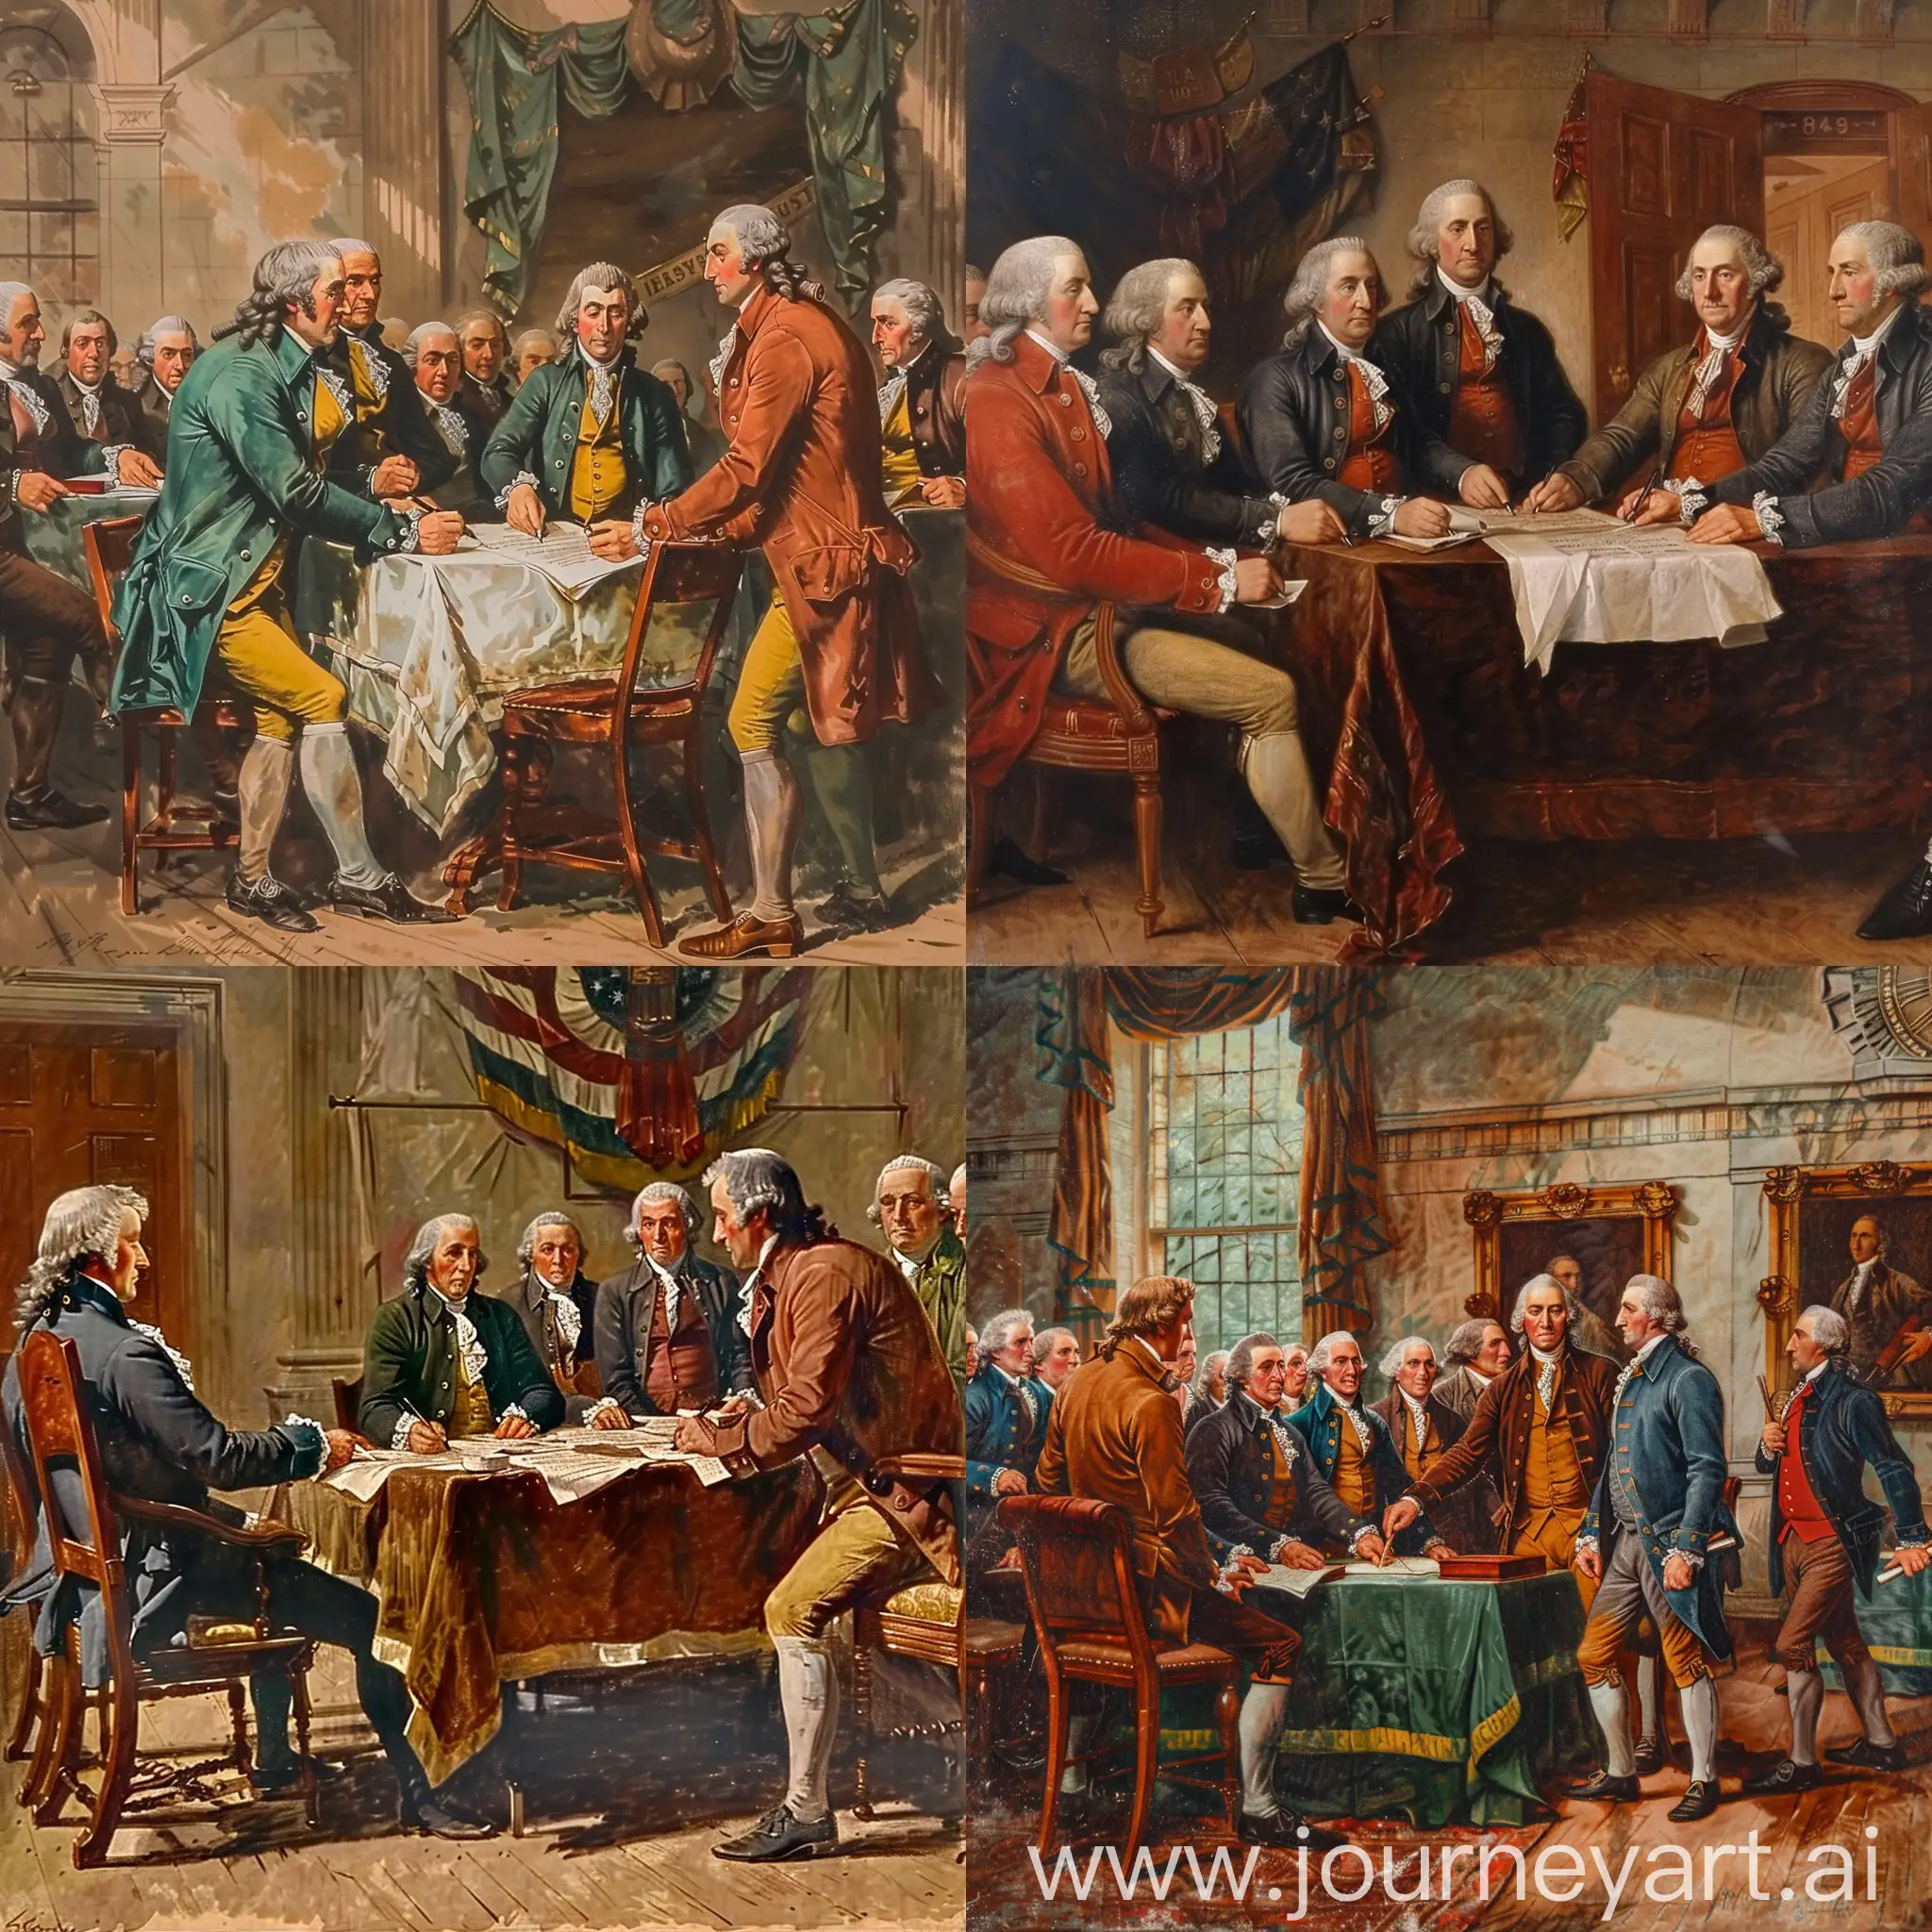 Signing-the-Declaration-of-Independence-in-Independence-Hall-1776